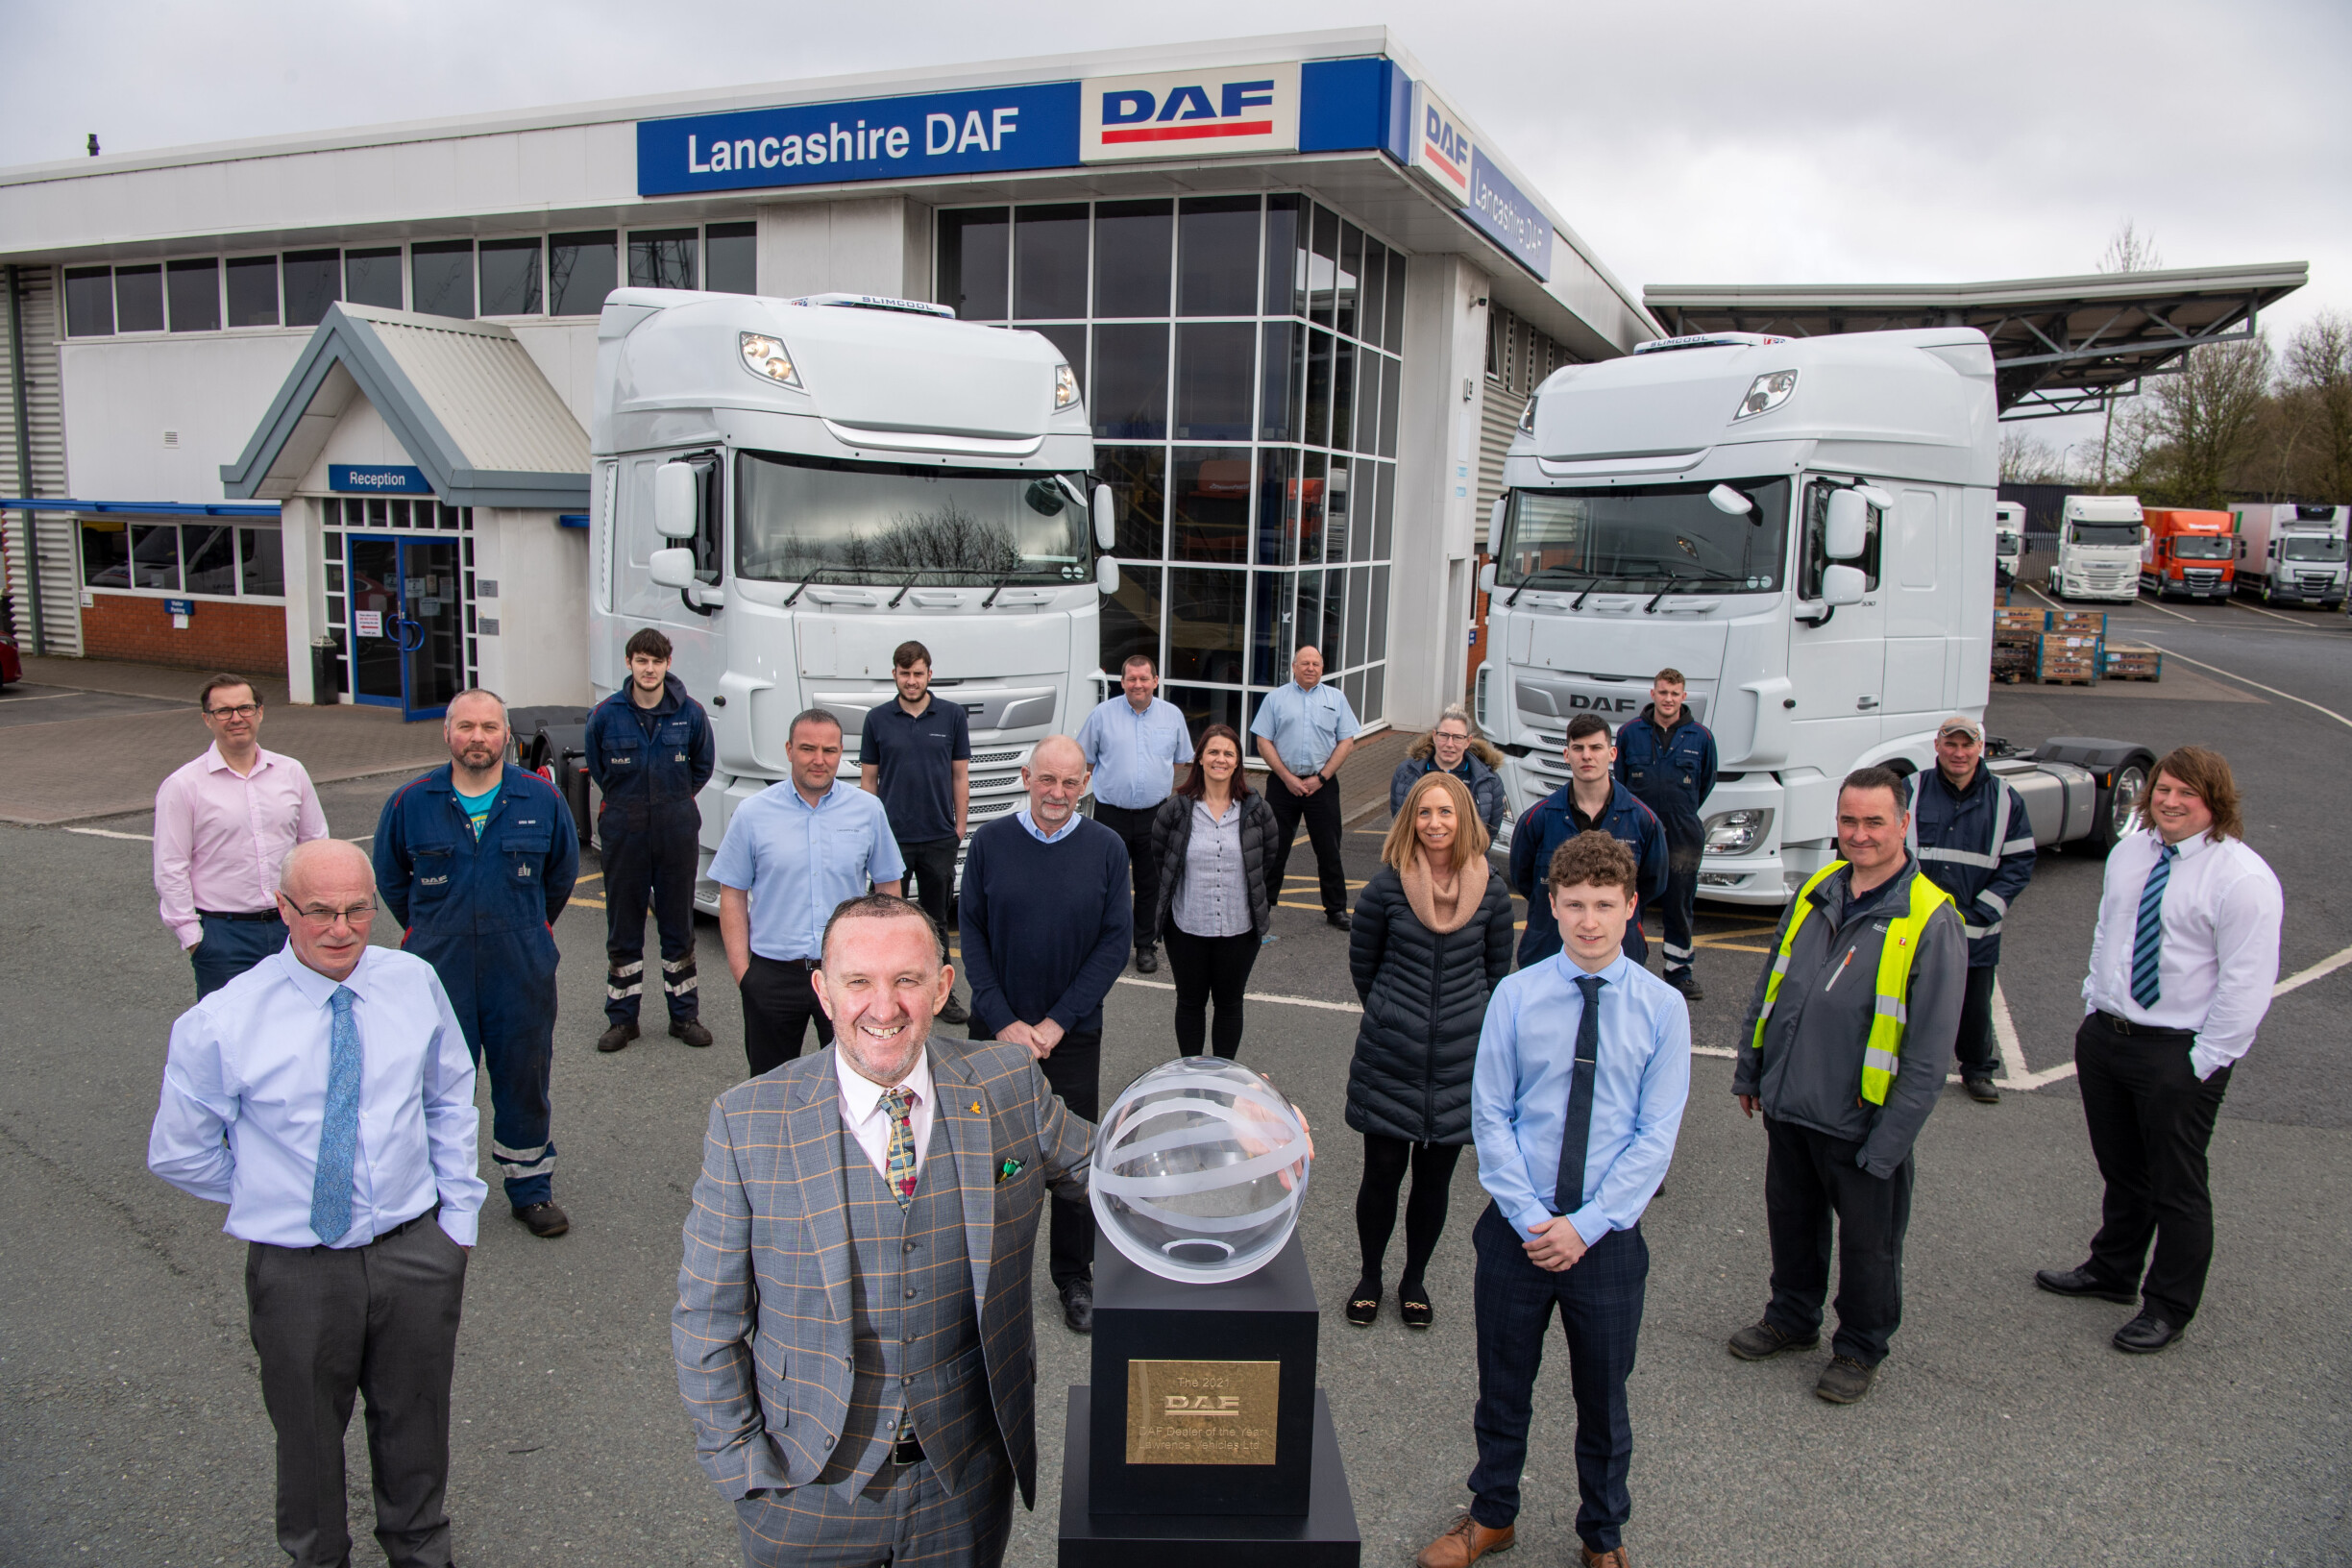 02_The_British_dealer_group_Lawrence_Vehicles_Ltd_has_been_awarded_DAF_International_Dealer_of_the_Year_2021